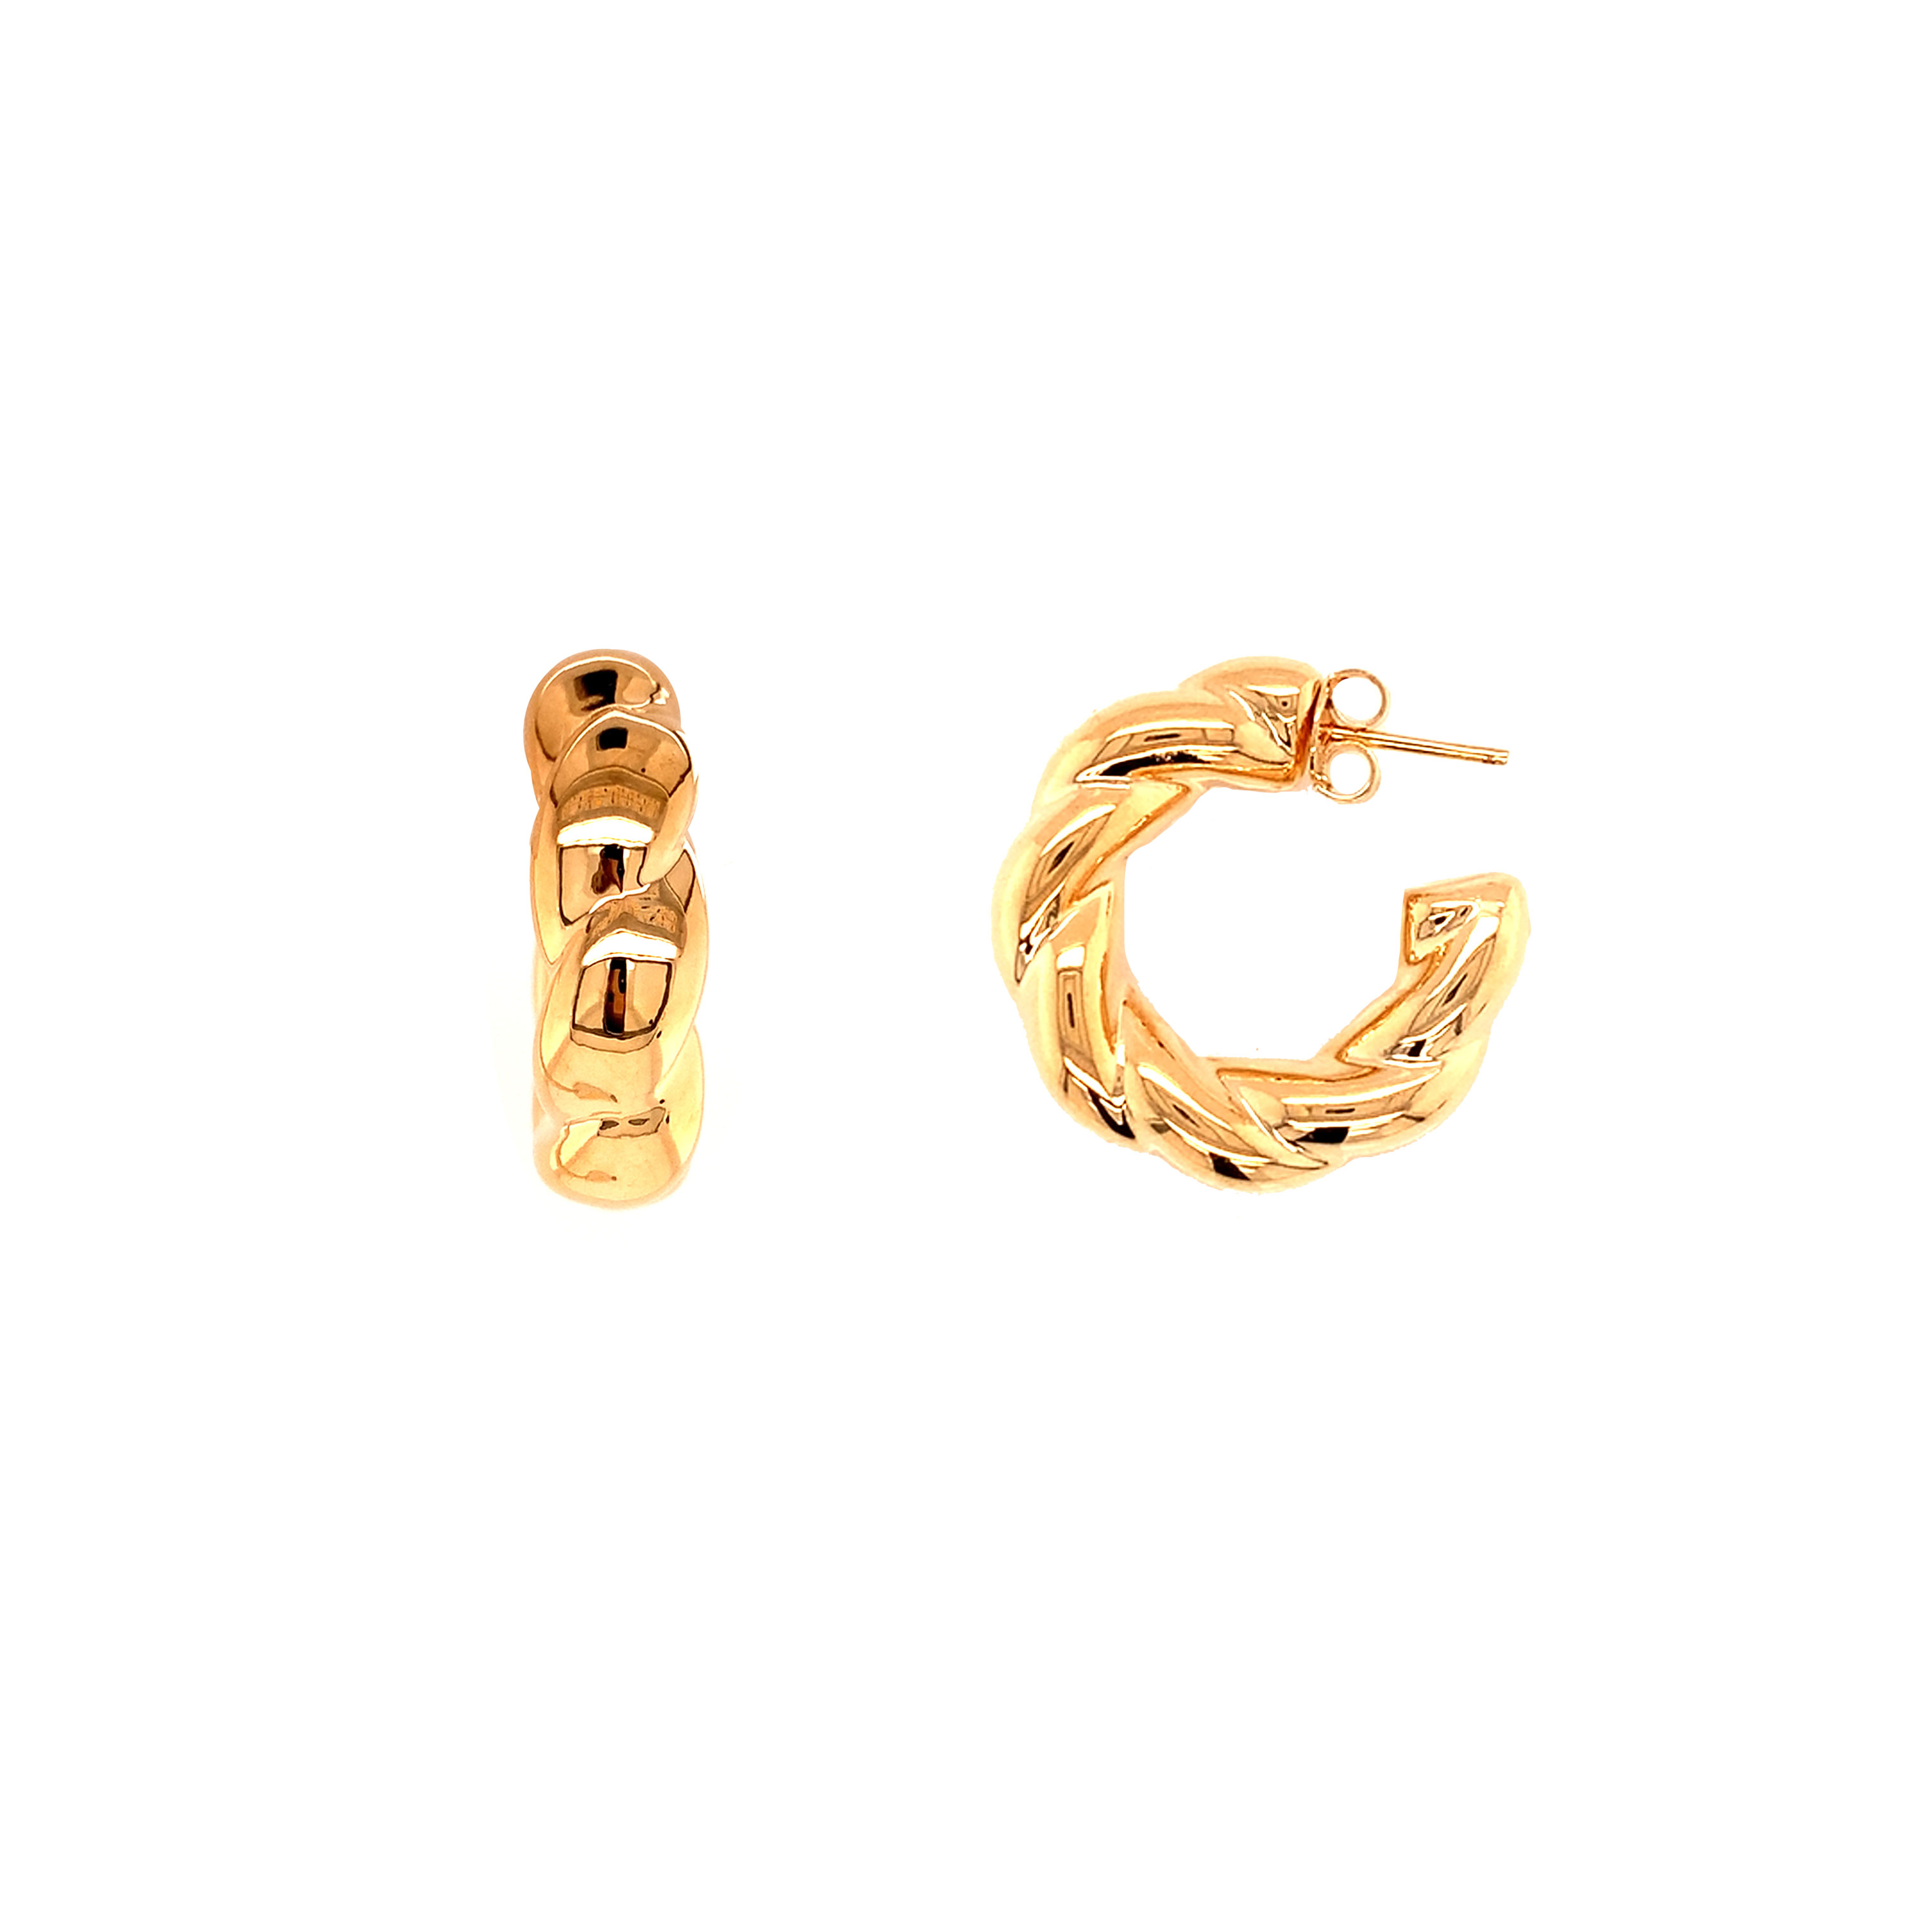 8mm x 30mm Twisted Hoop - Gold Filled